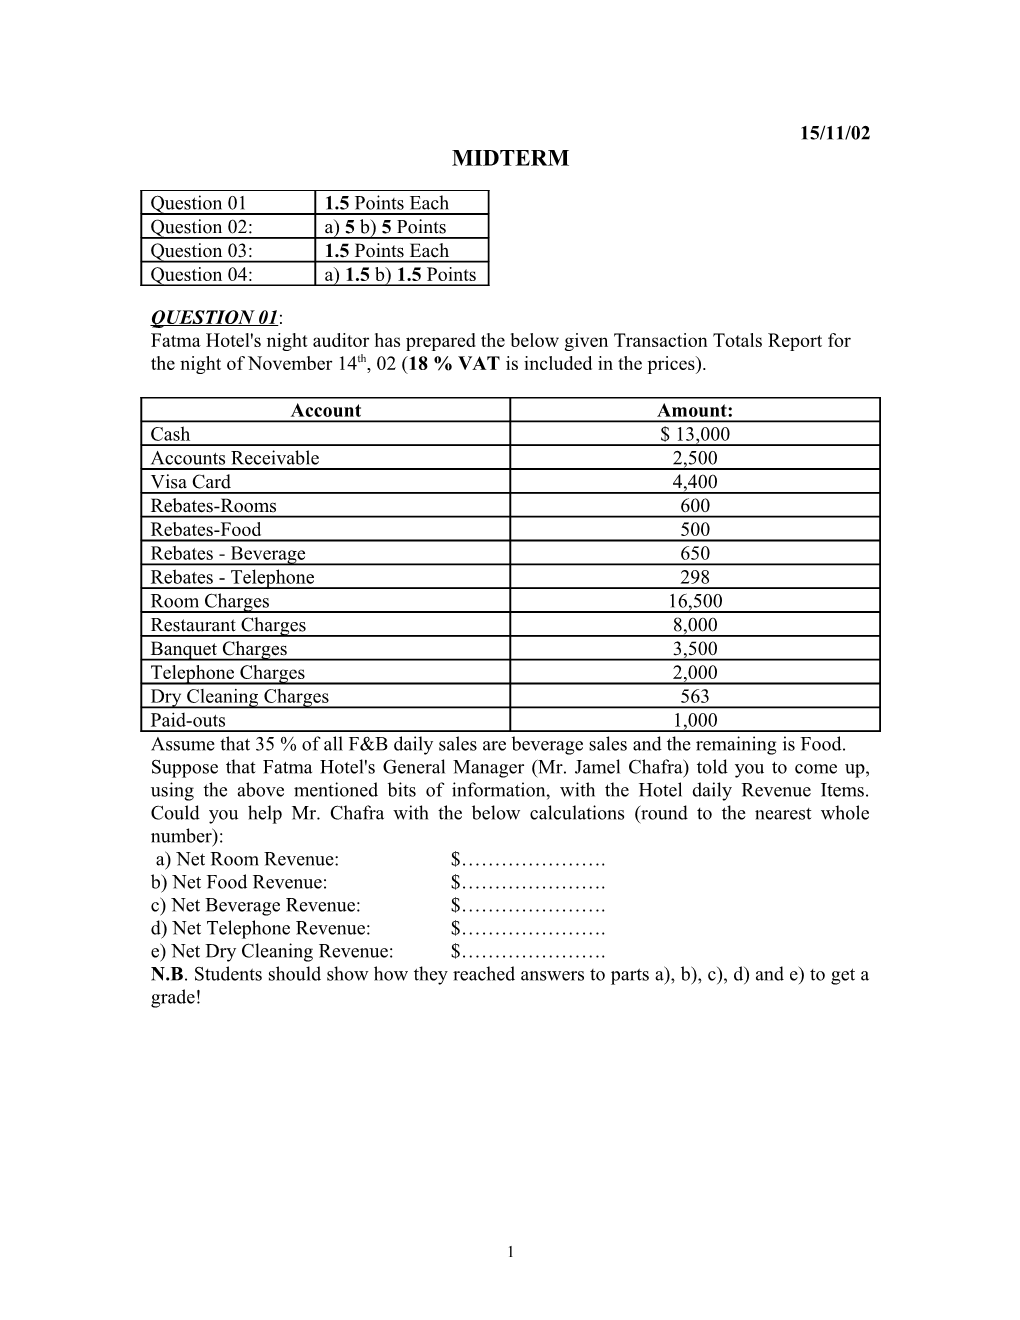 BJK Hotel S Night Auditor Has Prepared the Below Given Transaction Totals Report for October